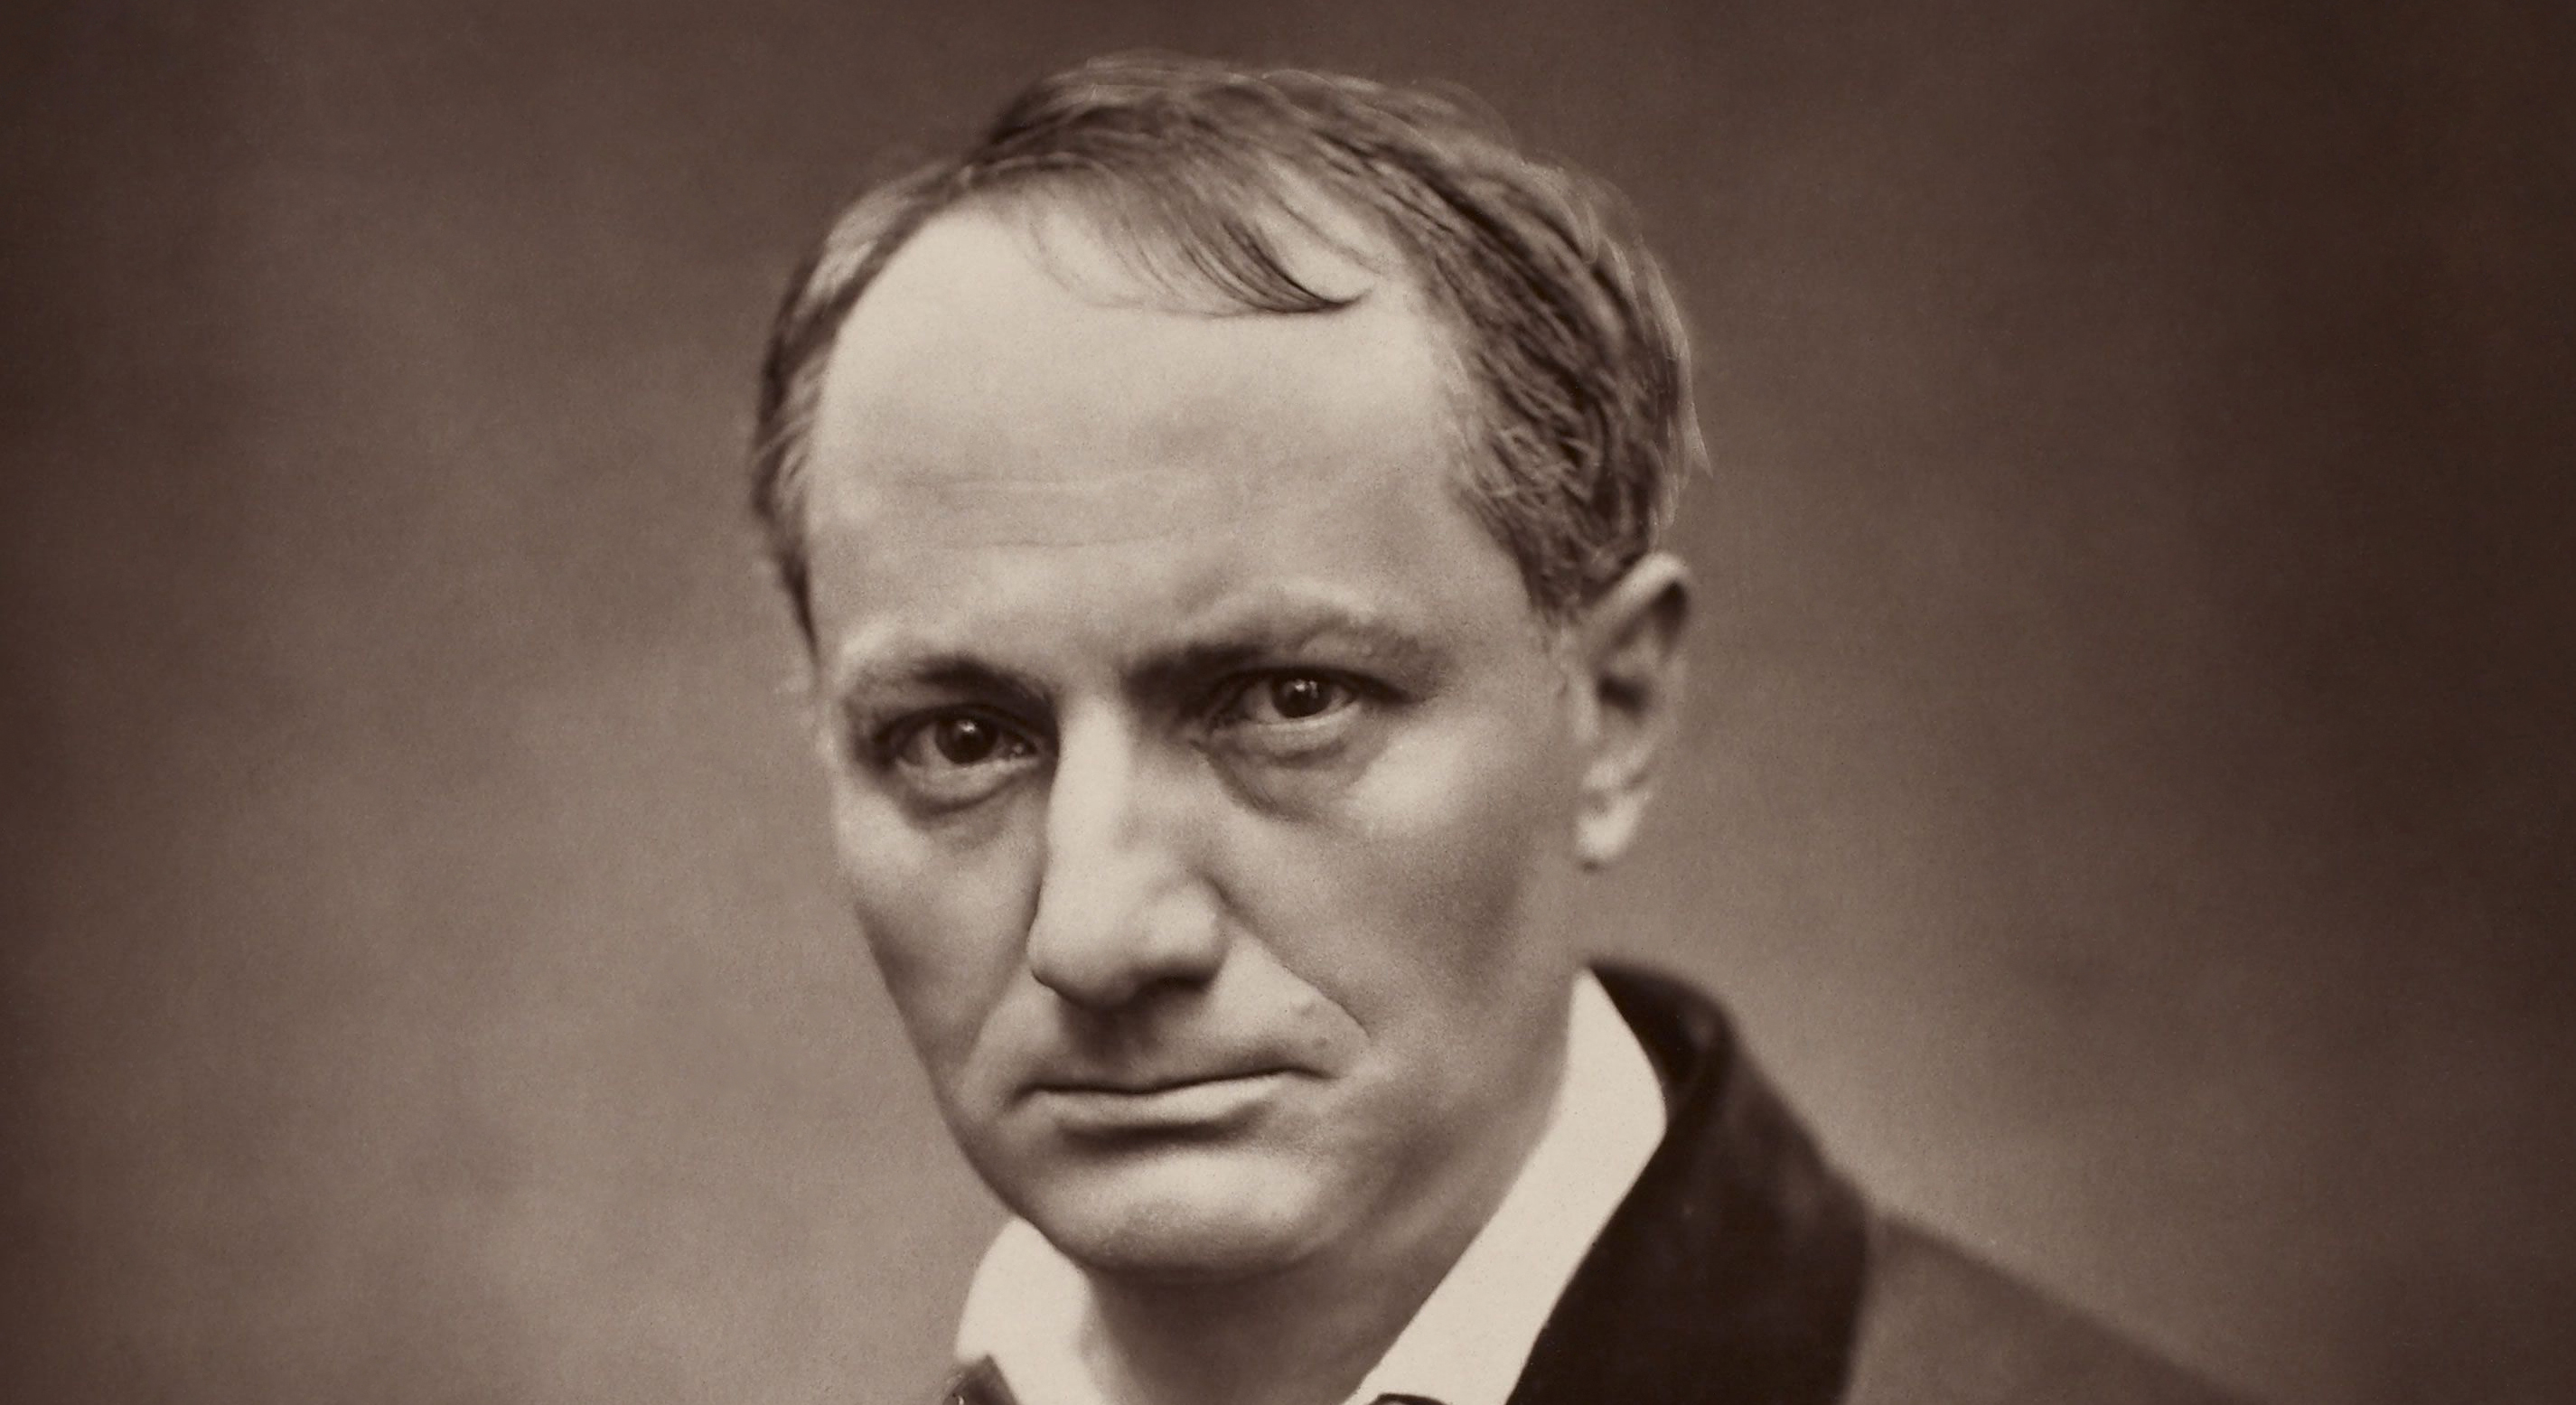 Charles Baudelaire.